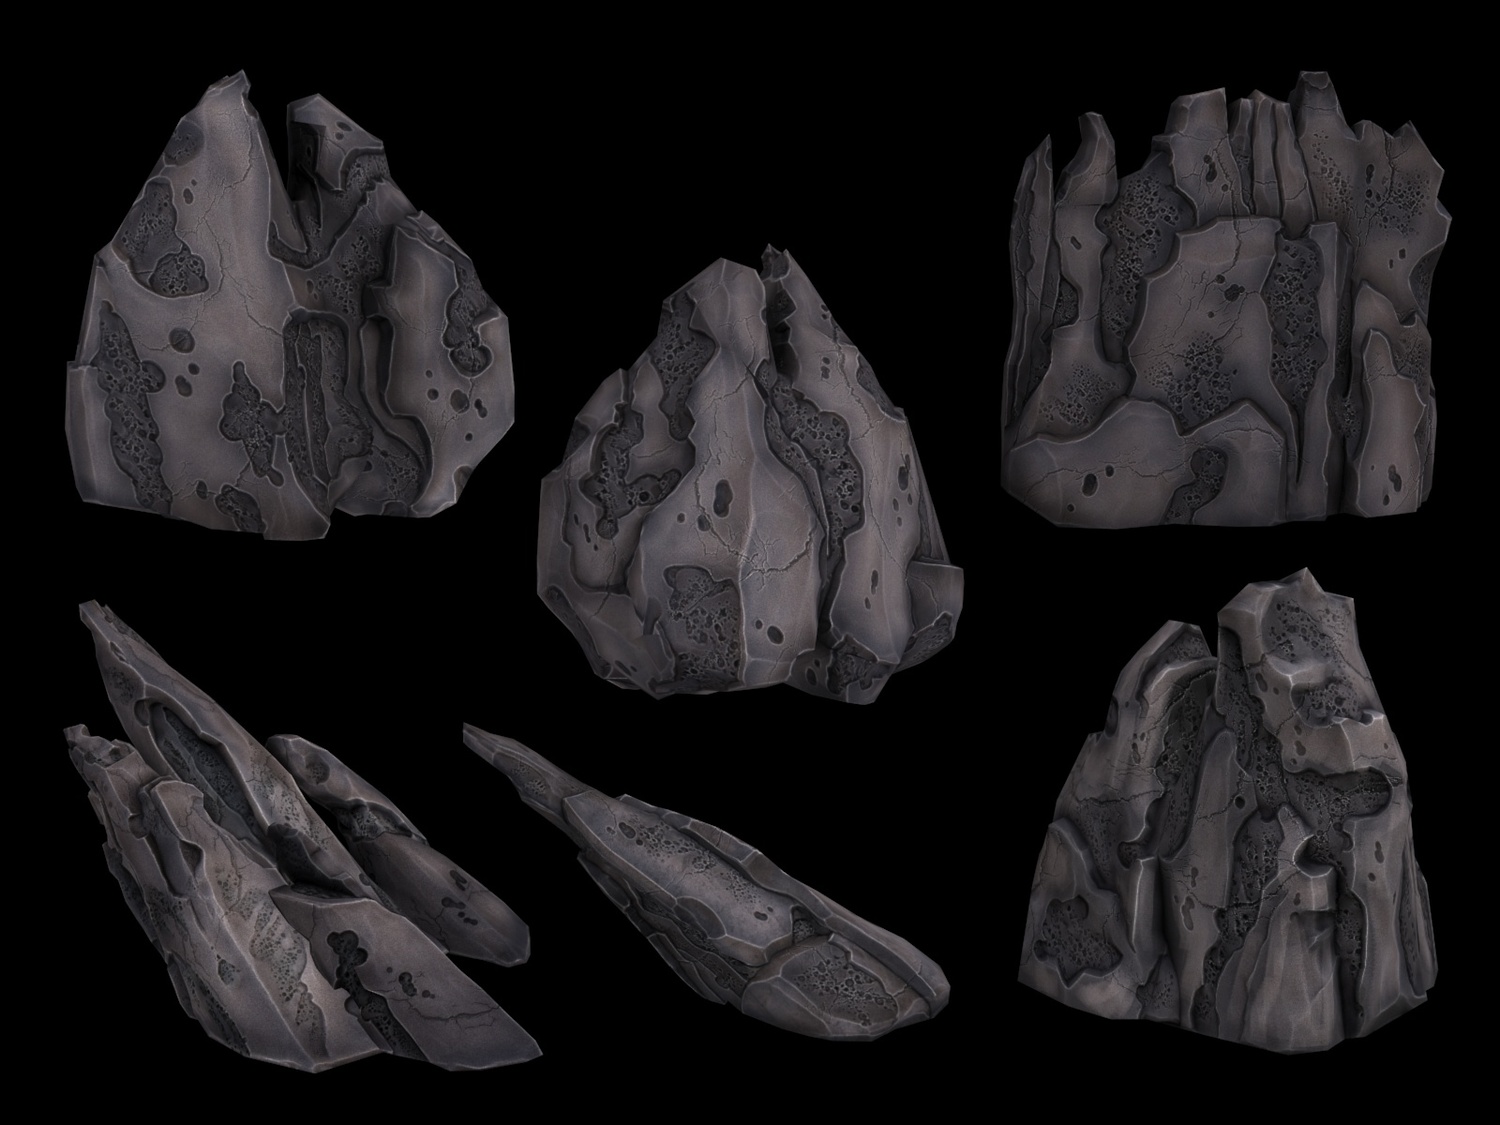  A set of rock assets that were used frequently throughout one of the game's acts. Zbrush -&gt; Topogun -&gt; Maya. 